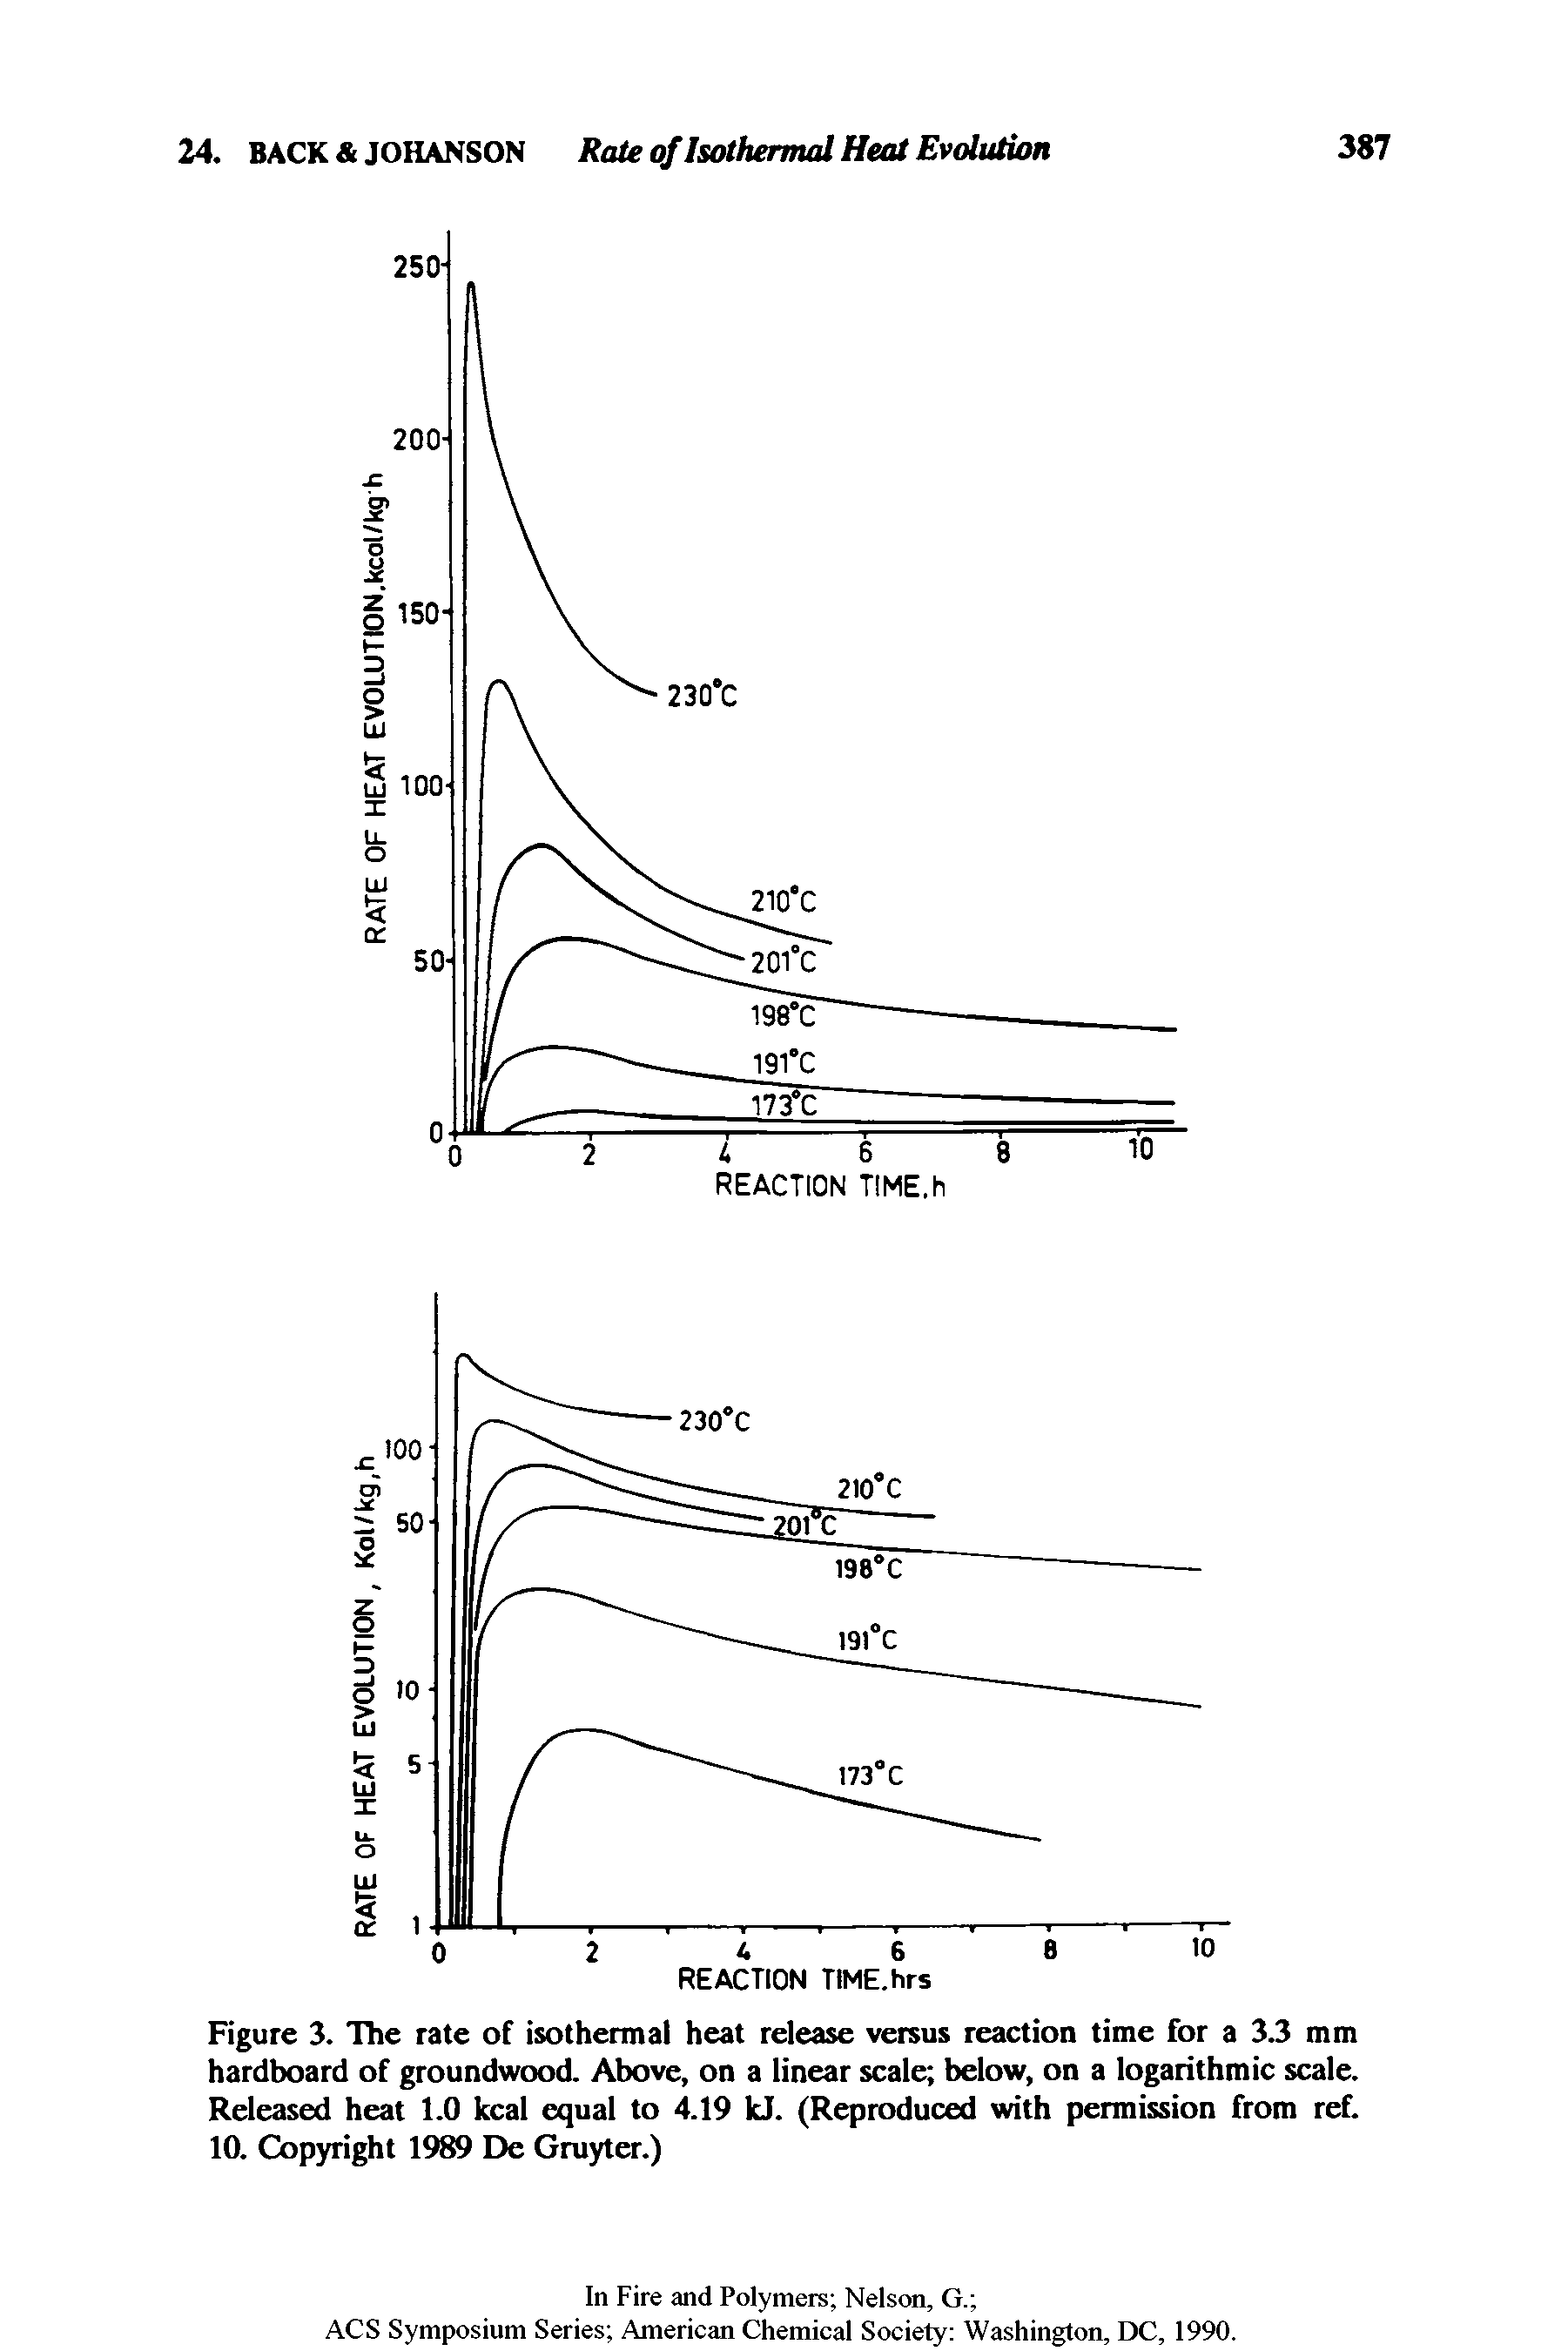 Figure 3. The rate of isothermal heat release versus reaction time for a 3.3 mm hardboard of groundwood. Above, on a linear scale below, on a logarithmic scale. Released heat 1.0 kcal equal to 4.19 kJ. (Reproduced with permission from ref. 10. Copyright 1989 De Gruyter.)...